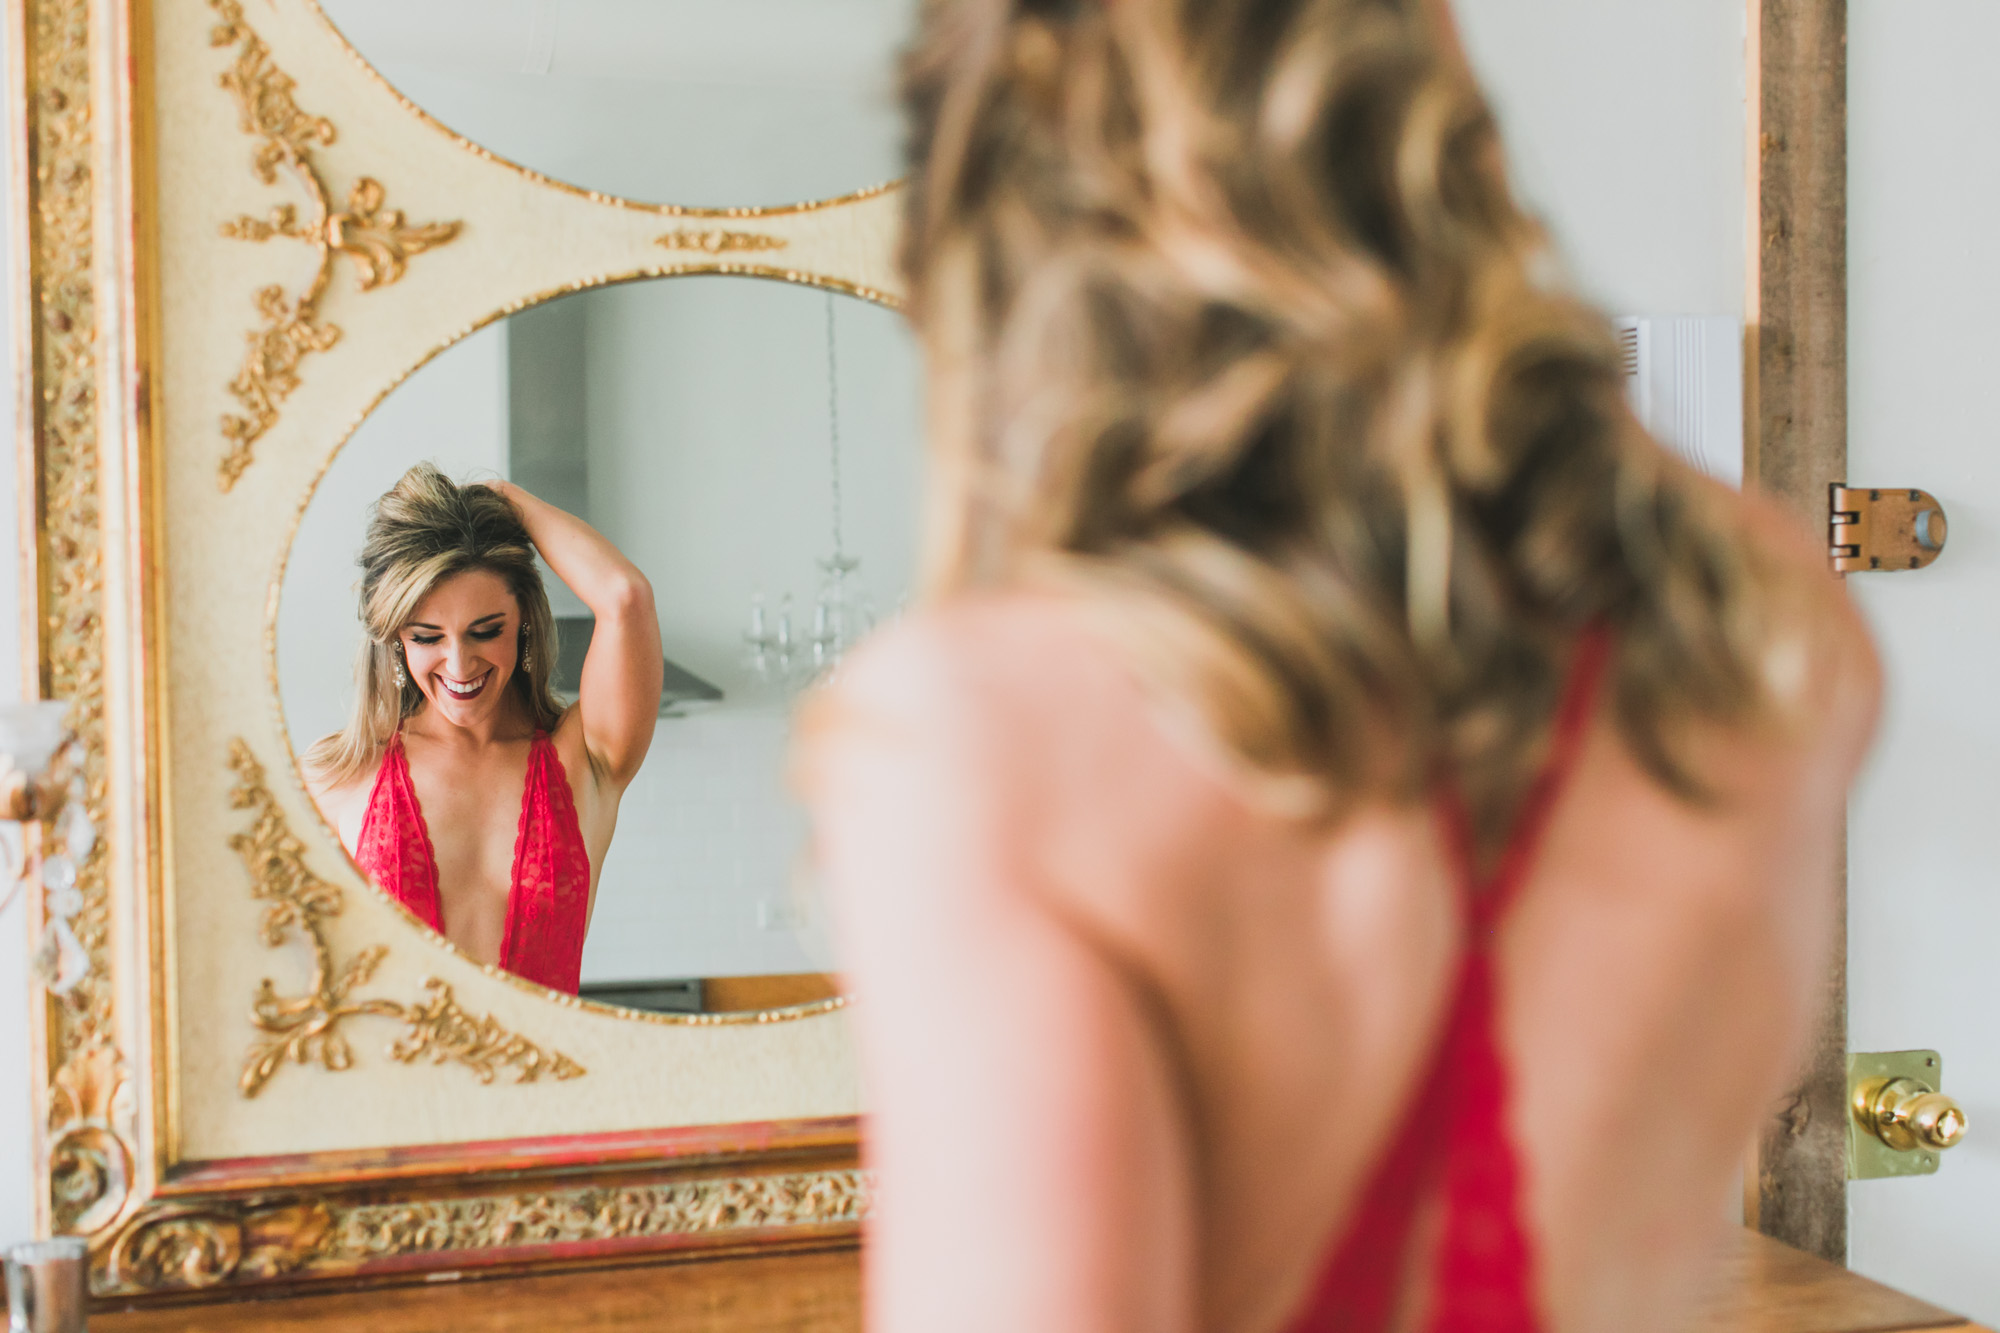 A beautiful mirror reflection boudoir photo of a woman wearing red lingerie.